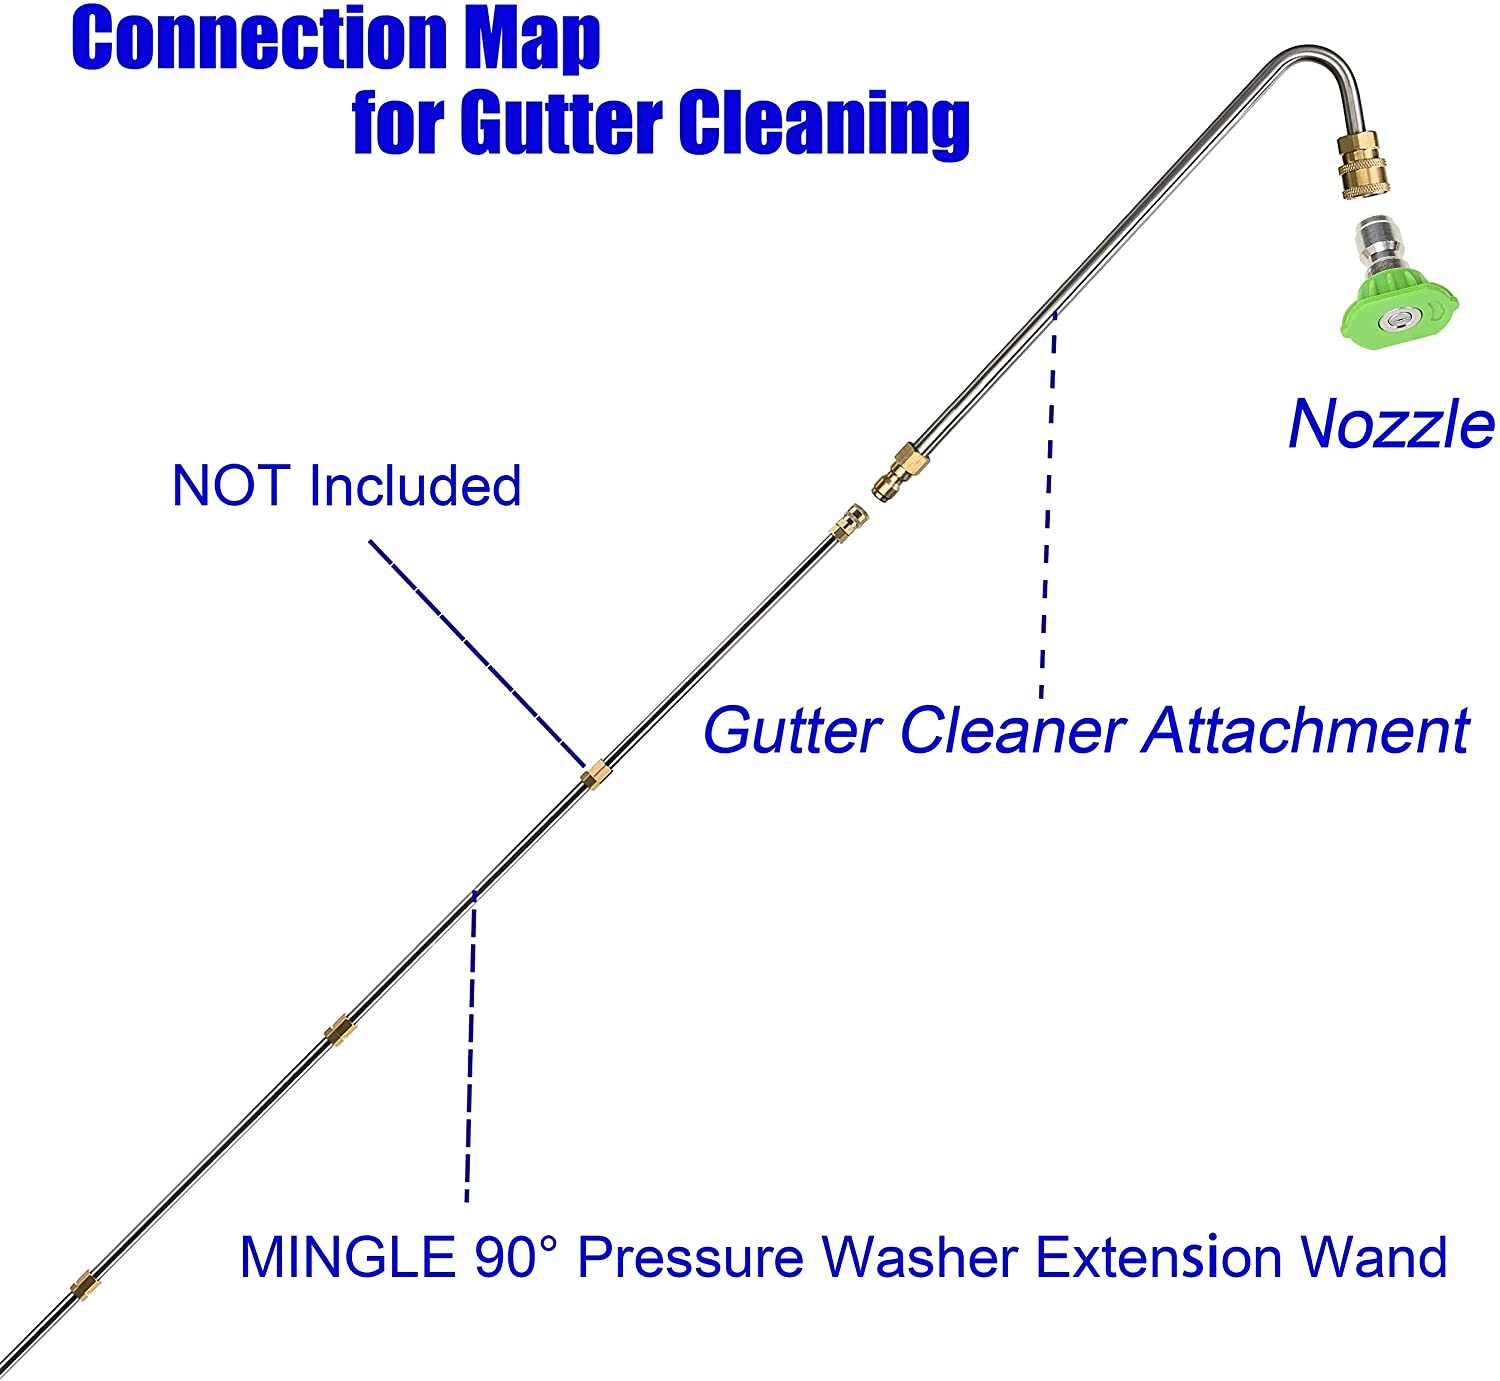 Pressure Washer Gutter Cleaner Attachment, Angled Extension Wand for Gutter Cleaning